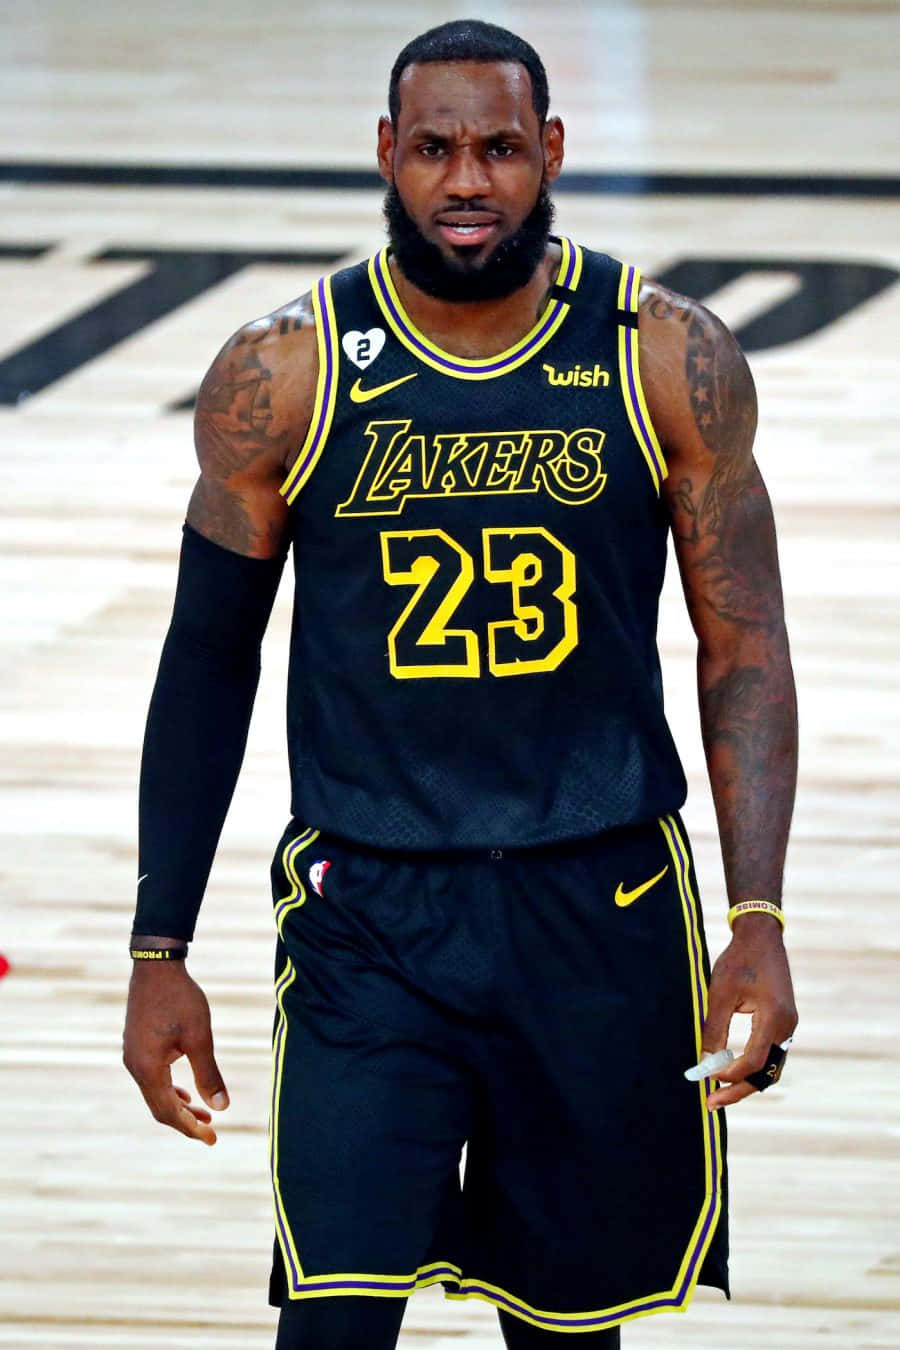 LeBron James celebrates his fourth NBA Championship win with the Los Angeles Lakers